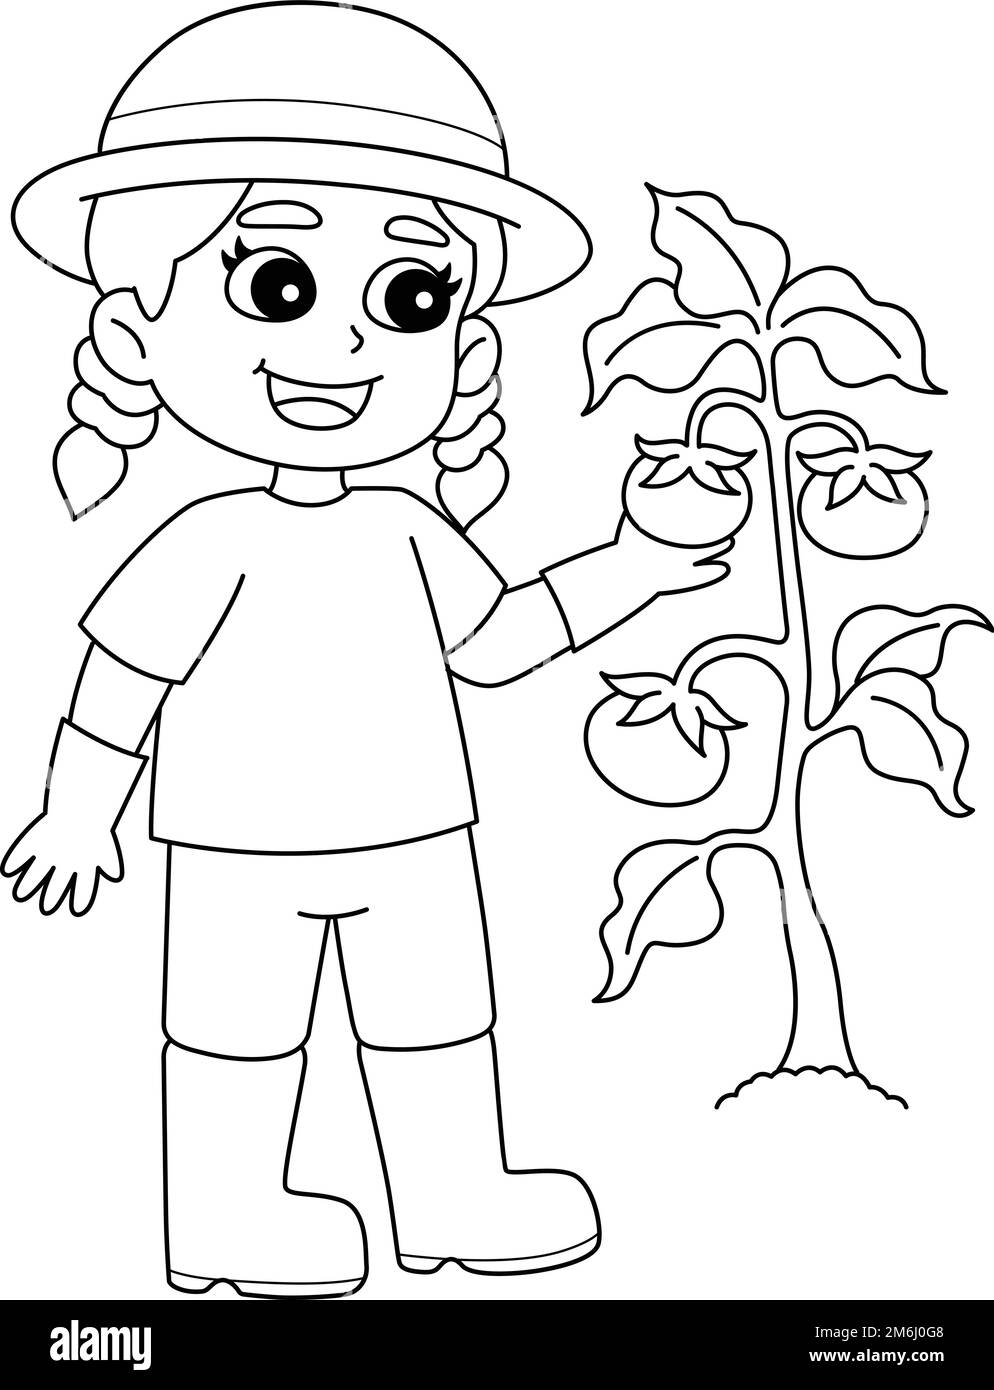 Girl Planting Vegetables Isolated Coloring Page  Stock Vector